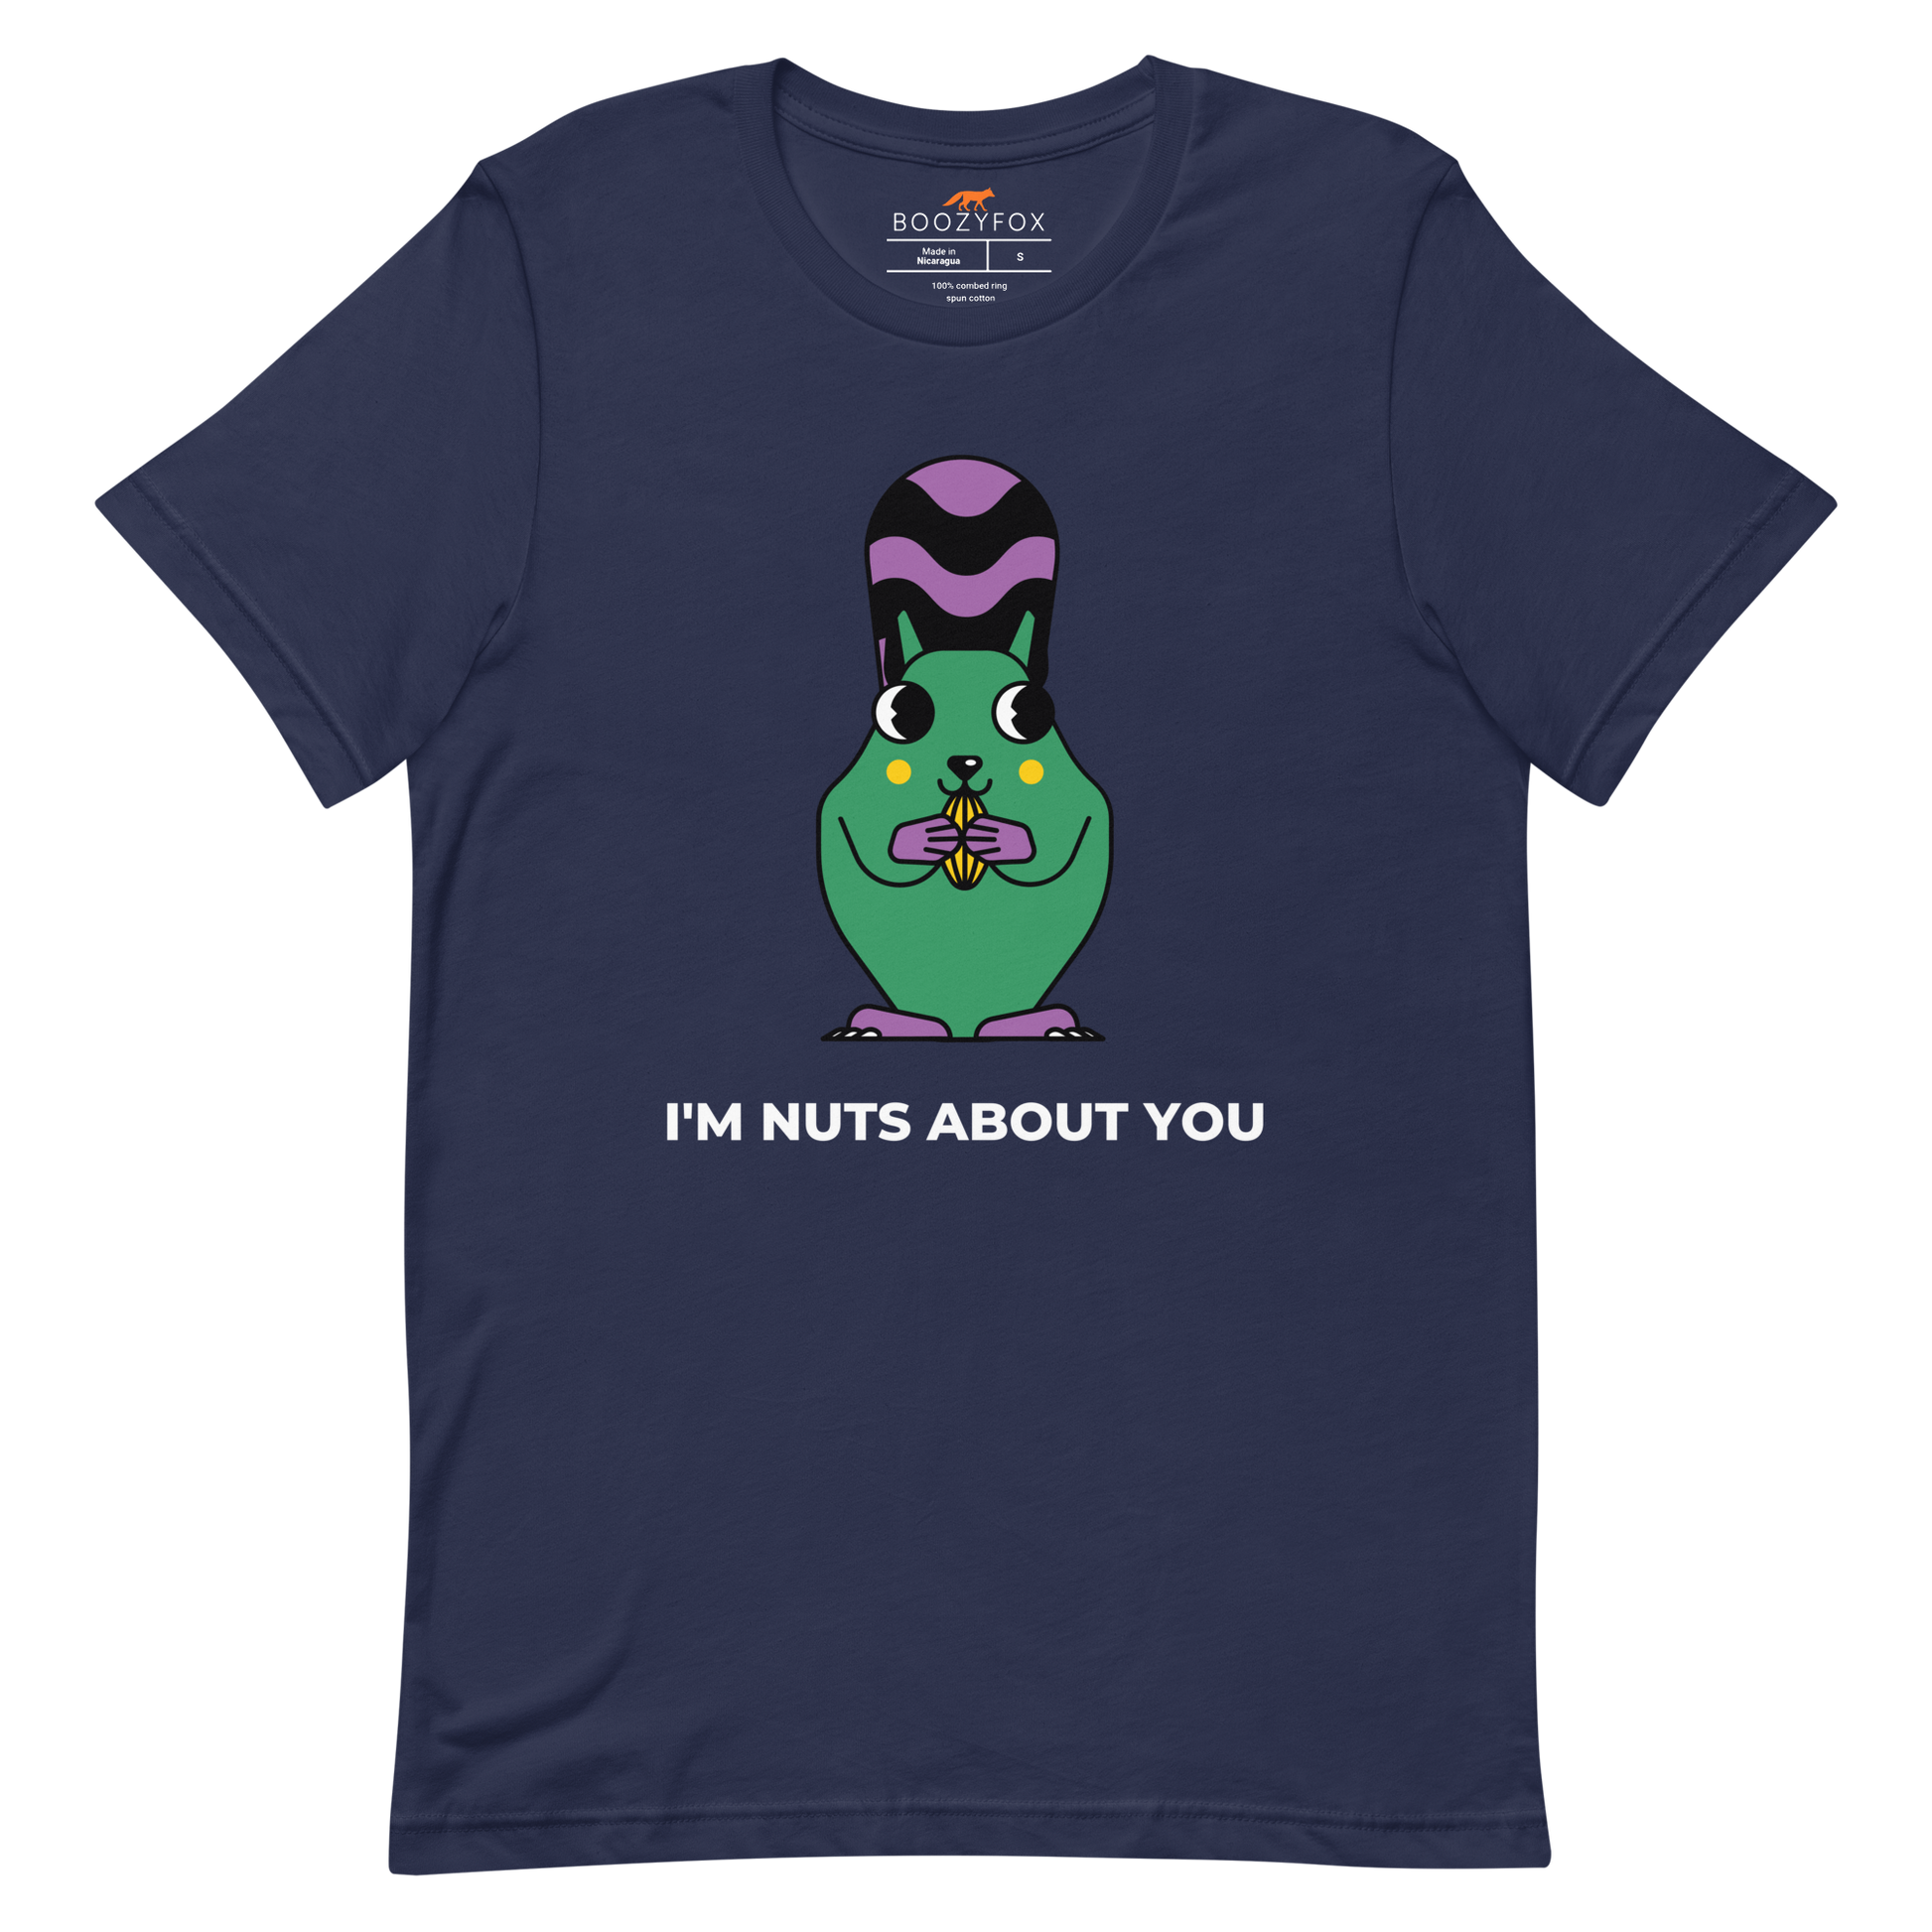 Navy Premium Squirrel T-Shirt featuring an I'm Nuts About You graphic on the chest - Funny Graphic Squirrel Tees - Boozy Fox